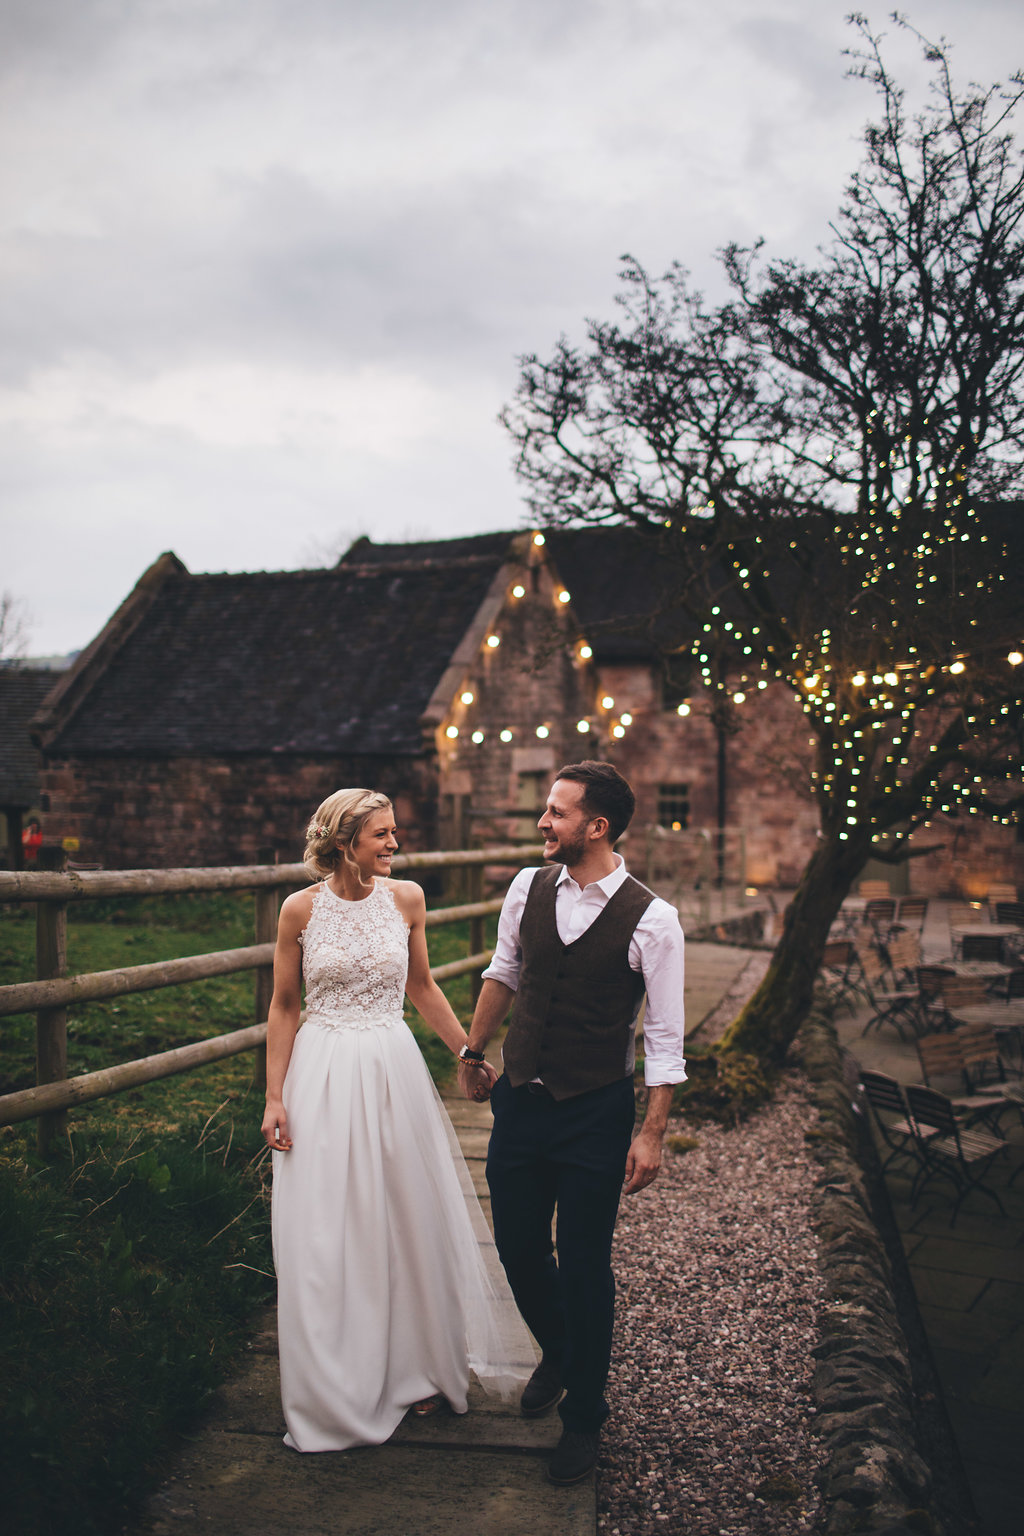 Couild hold hands in romantic portrait under festoon lights by manchester wedding photographer